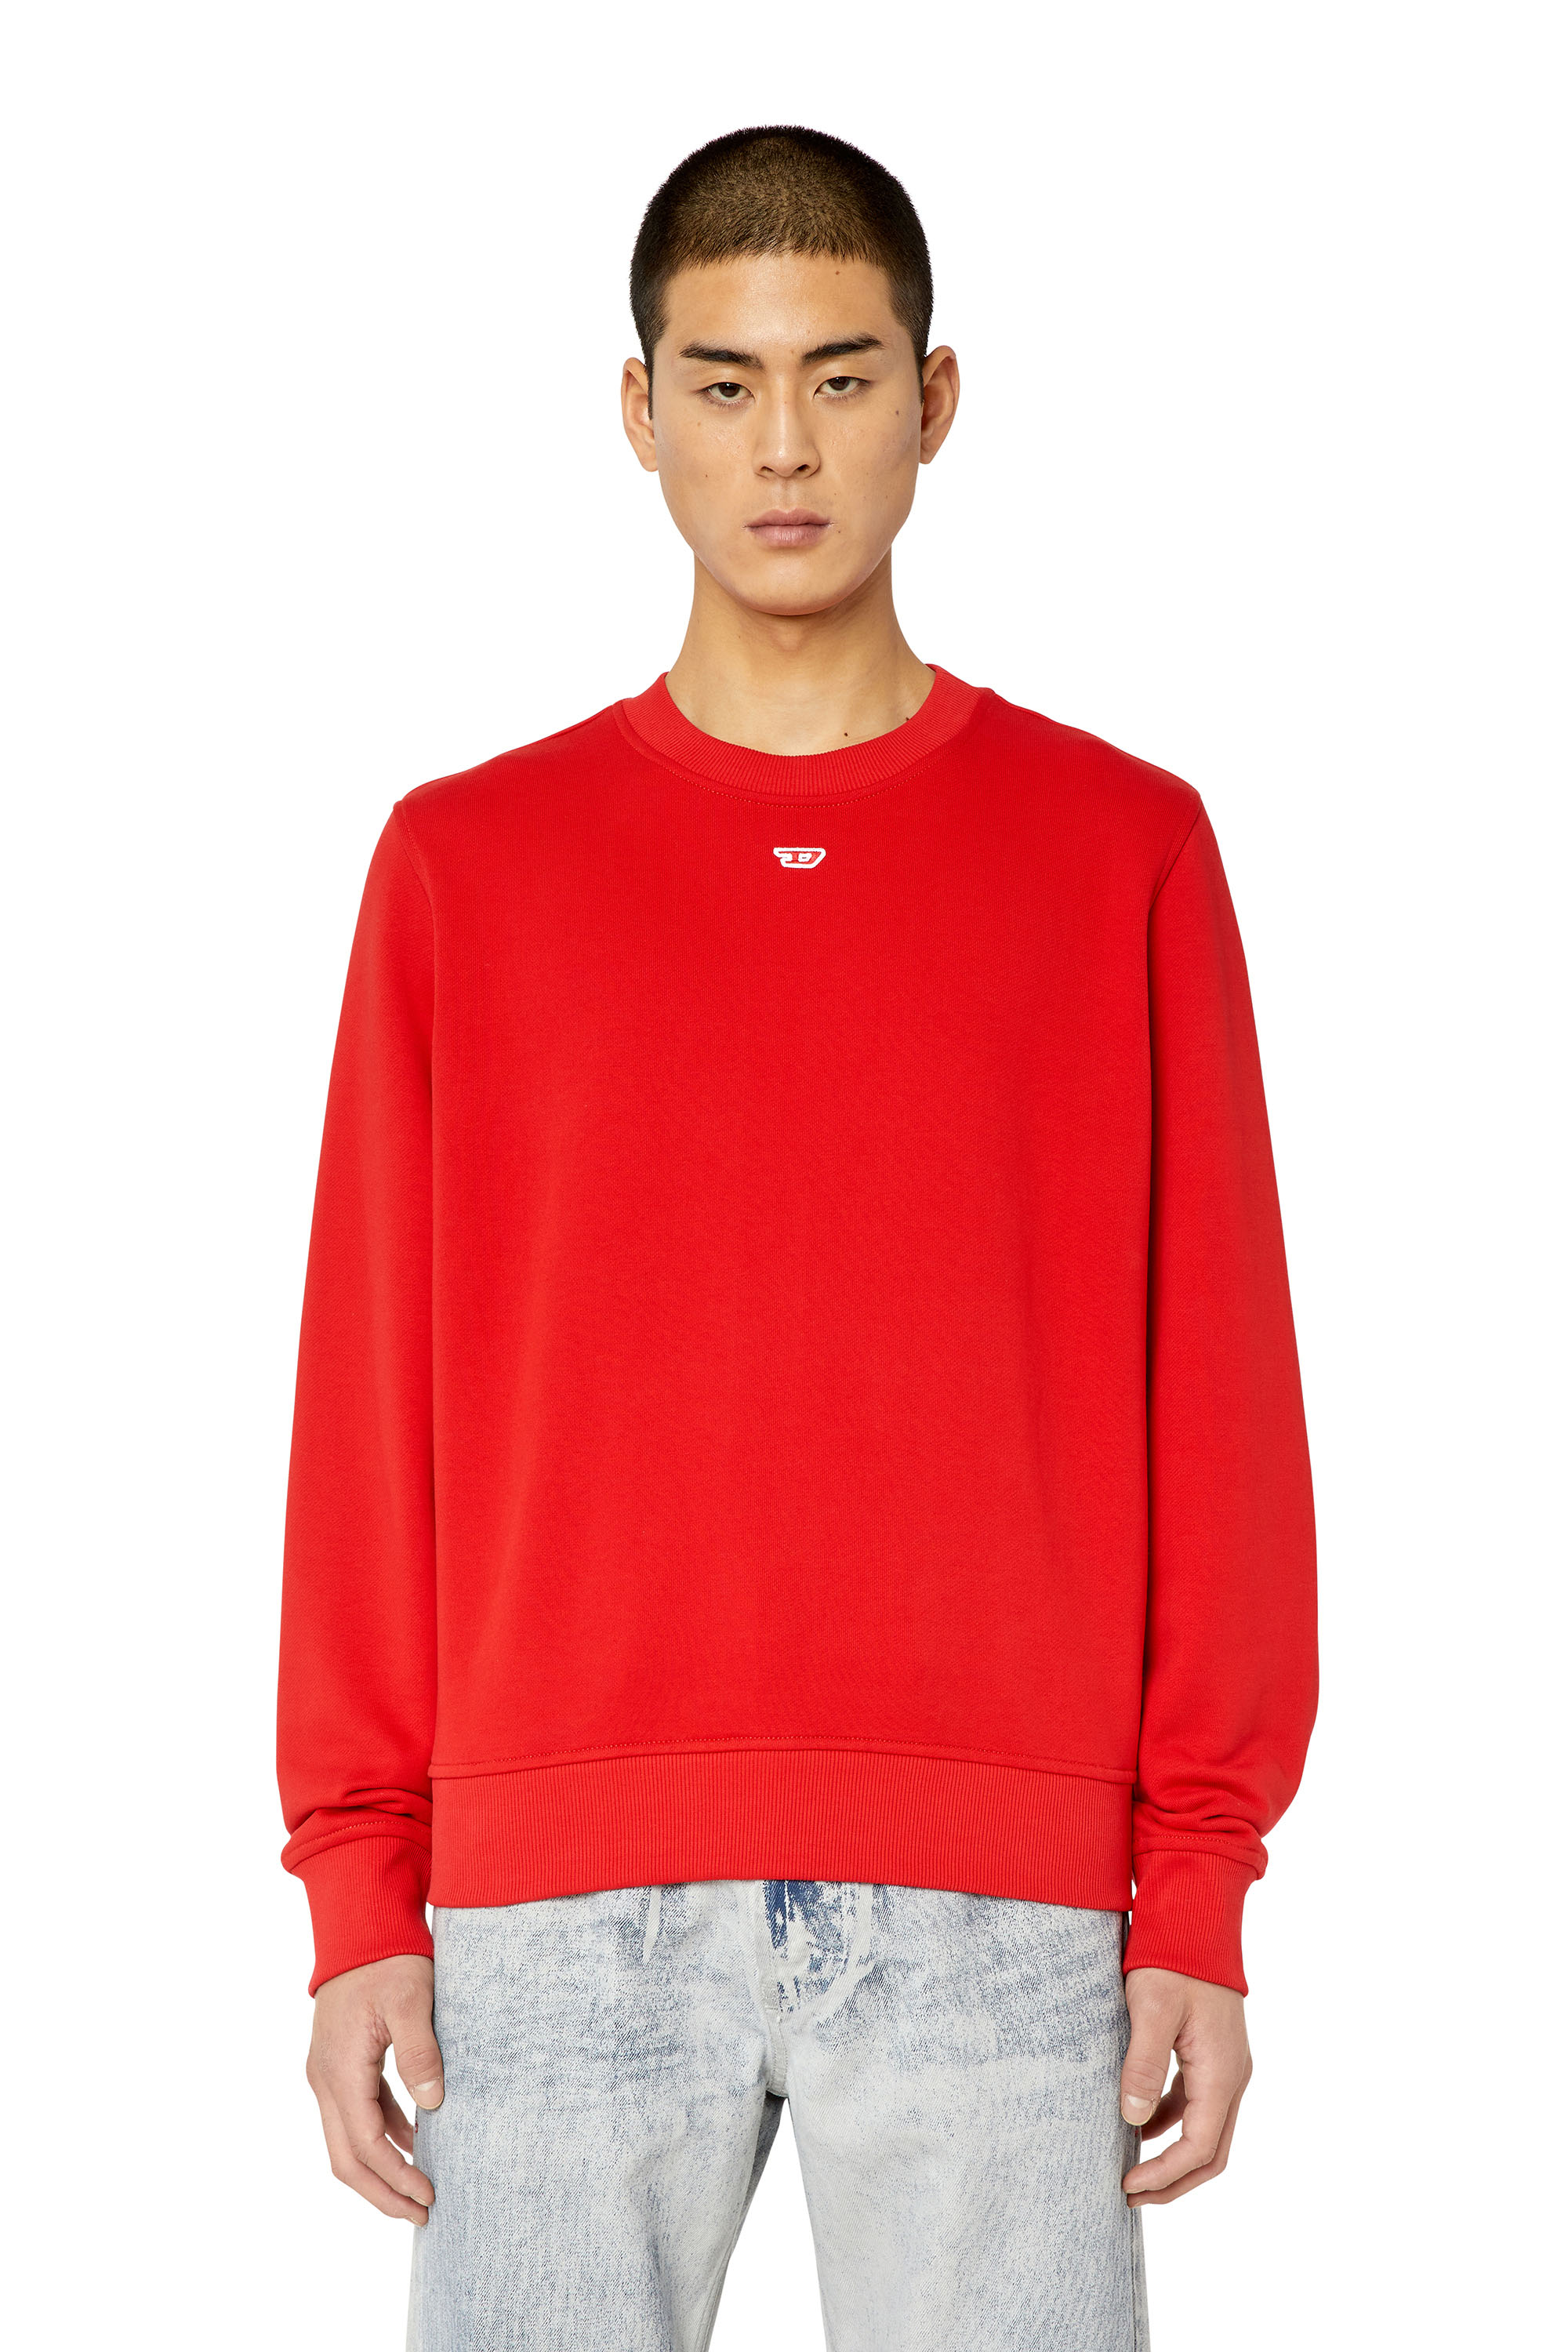 Diesel - S-GINN-D, Unisex Sweatshirt with mini D patch in Red - Image 2